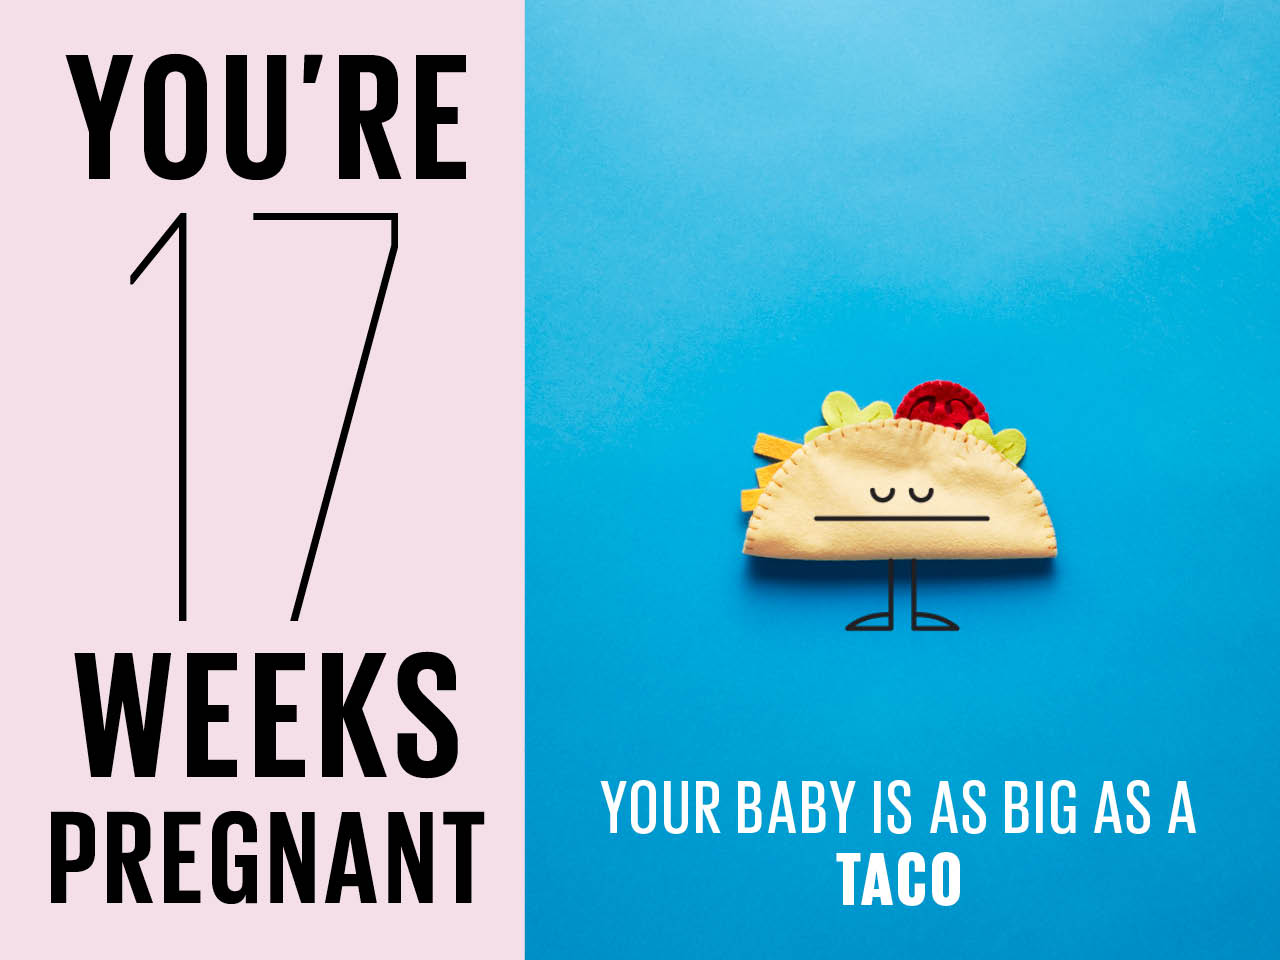 Felt taco used to show how big baby is at 17 weeks pregnant